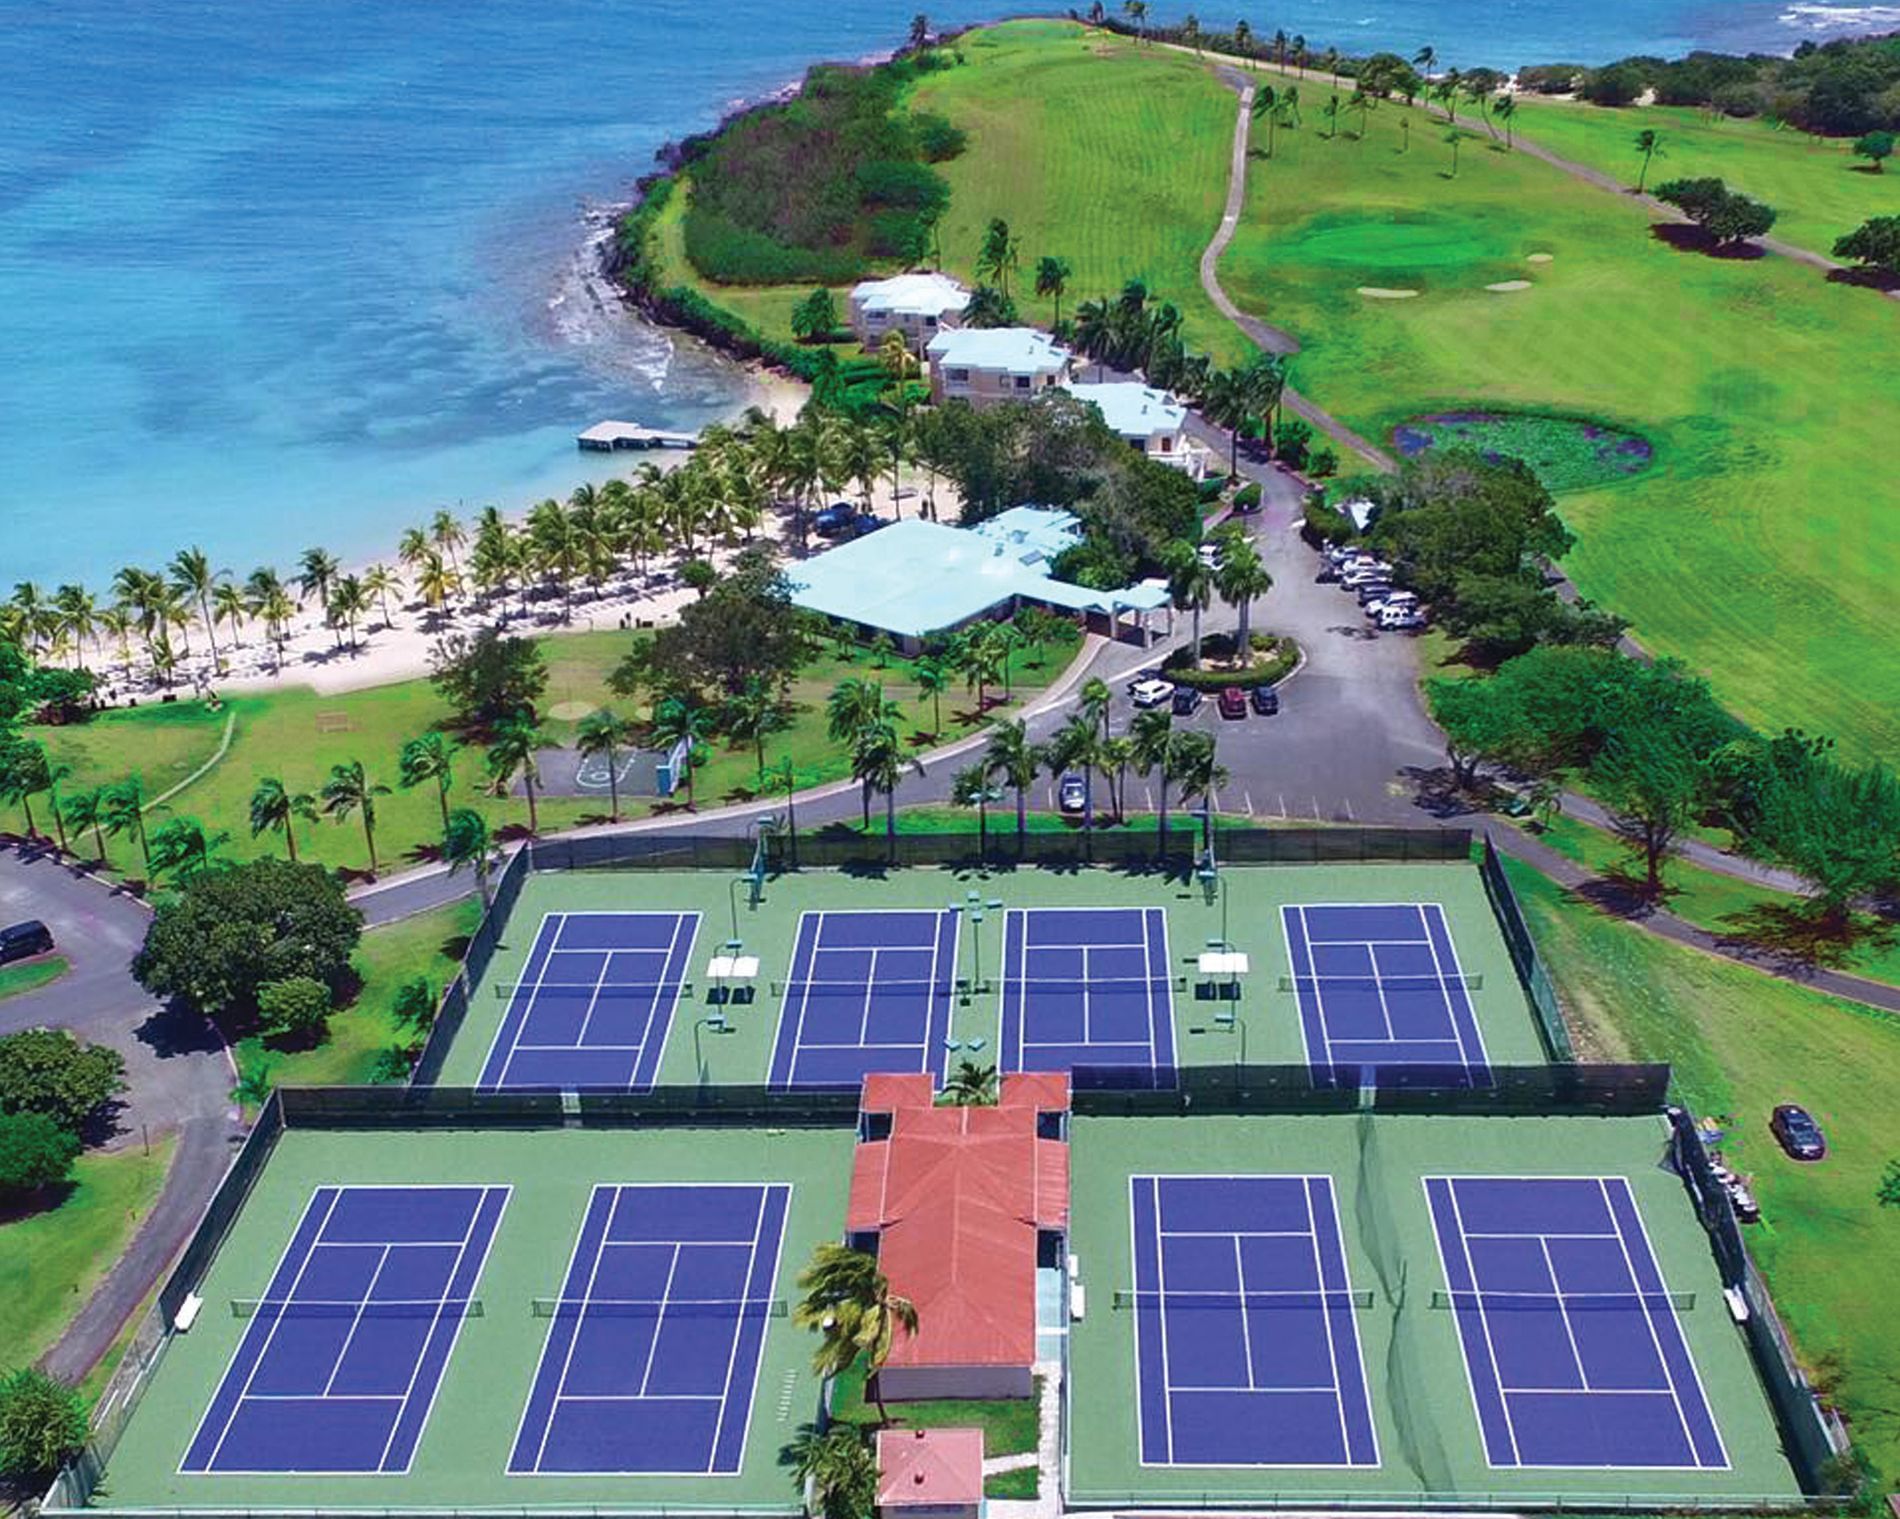 Aerial view of Tennis Courts by the ocean near Buccaneer Hotel